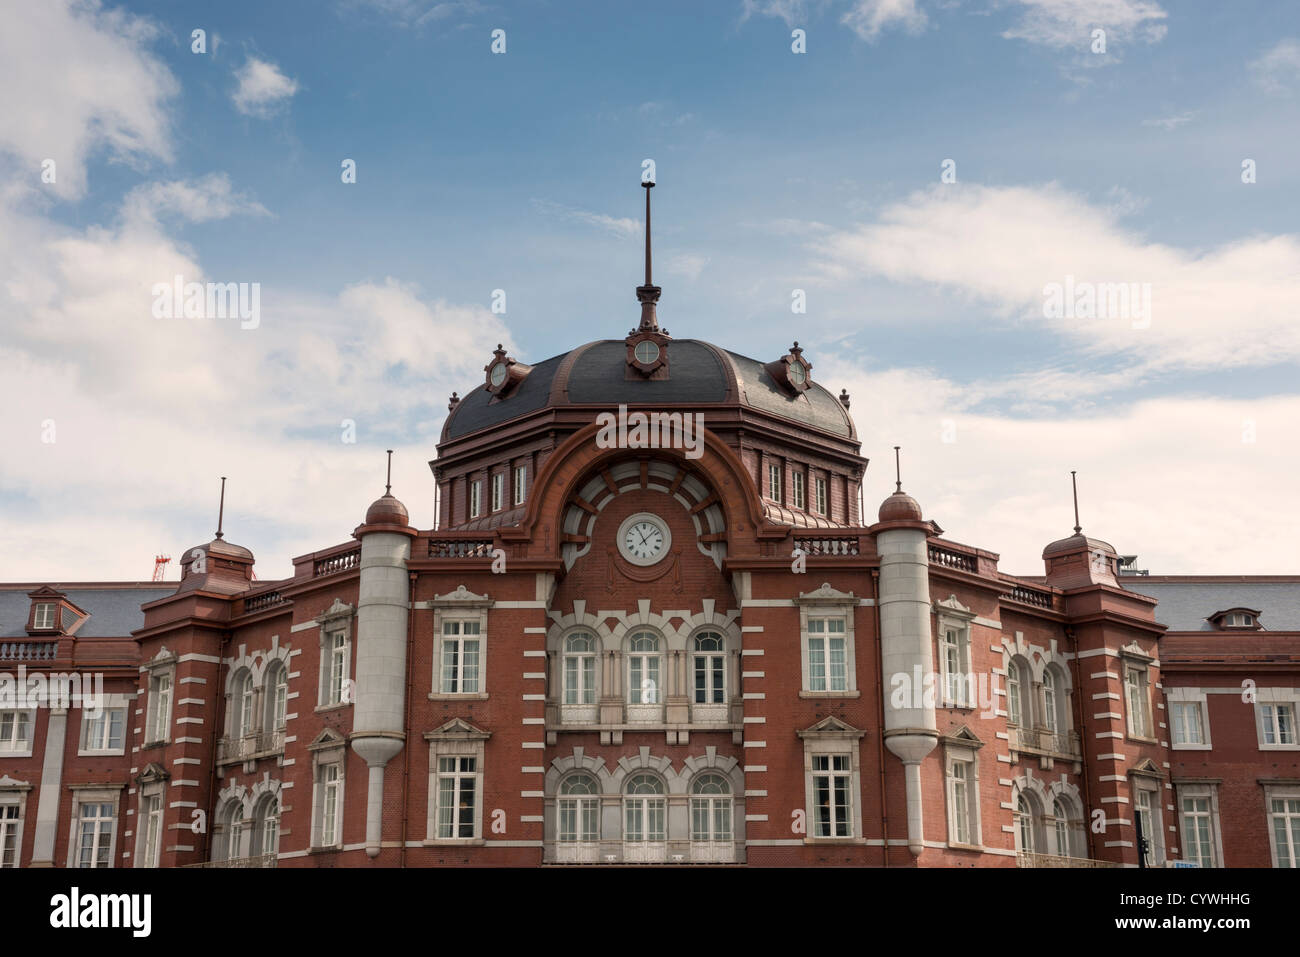 Tokyo Station Building opened on October 1 2012 after 5 years of restoration. Originally constructed in 1914. Japan. Stock Photo